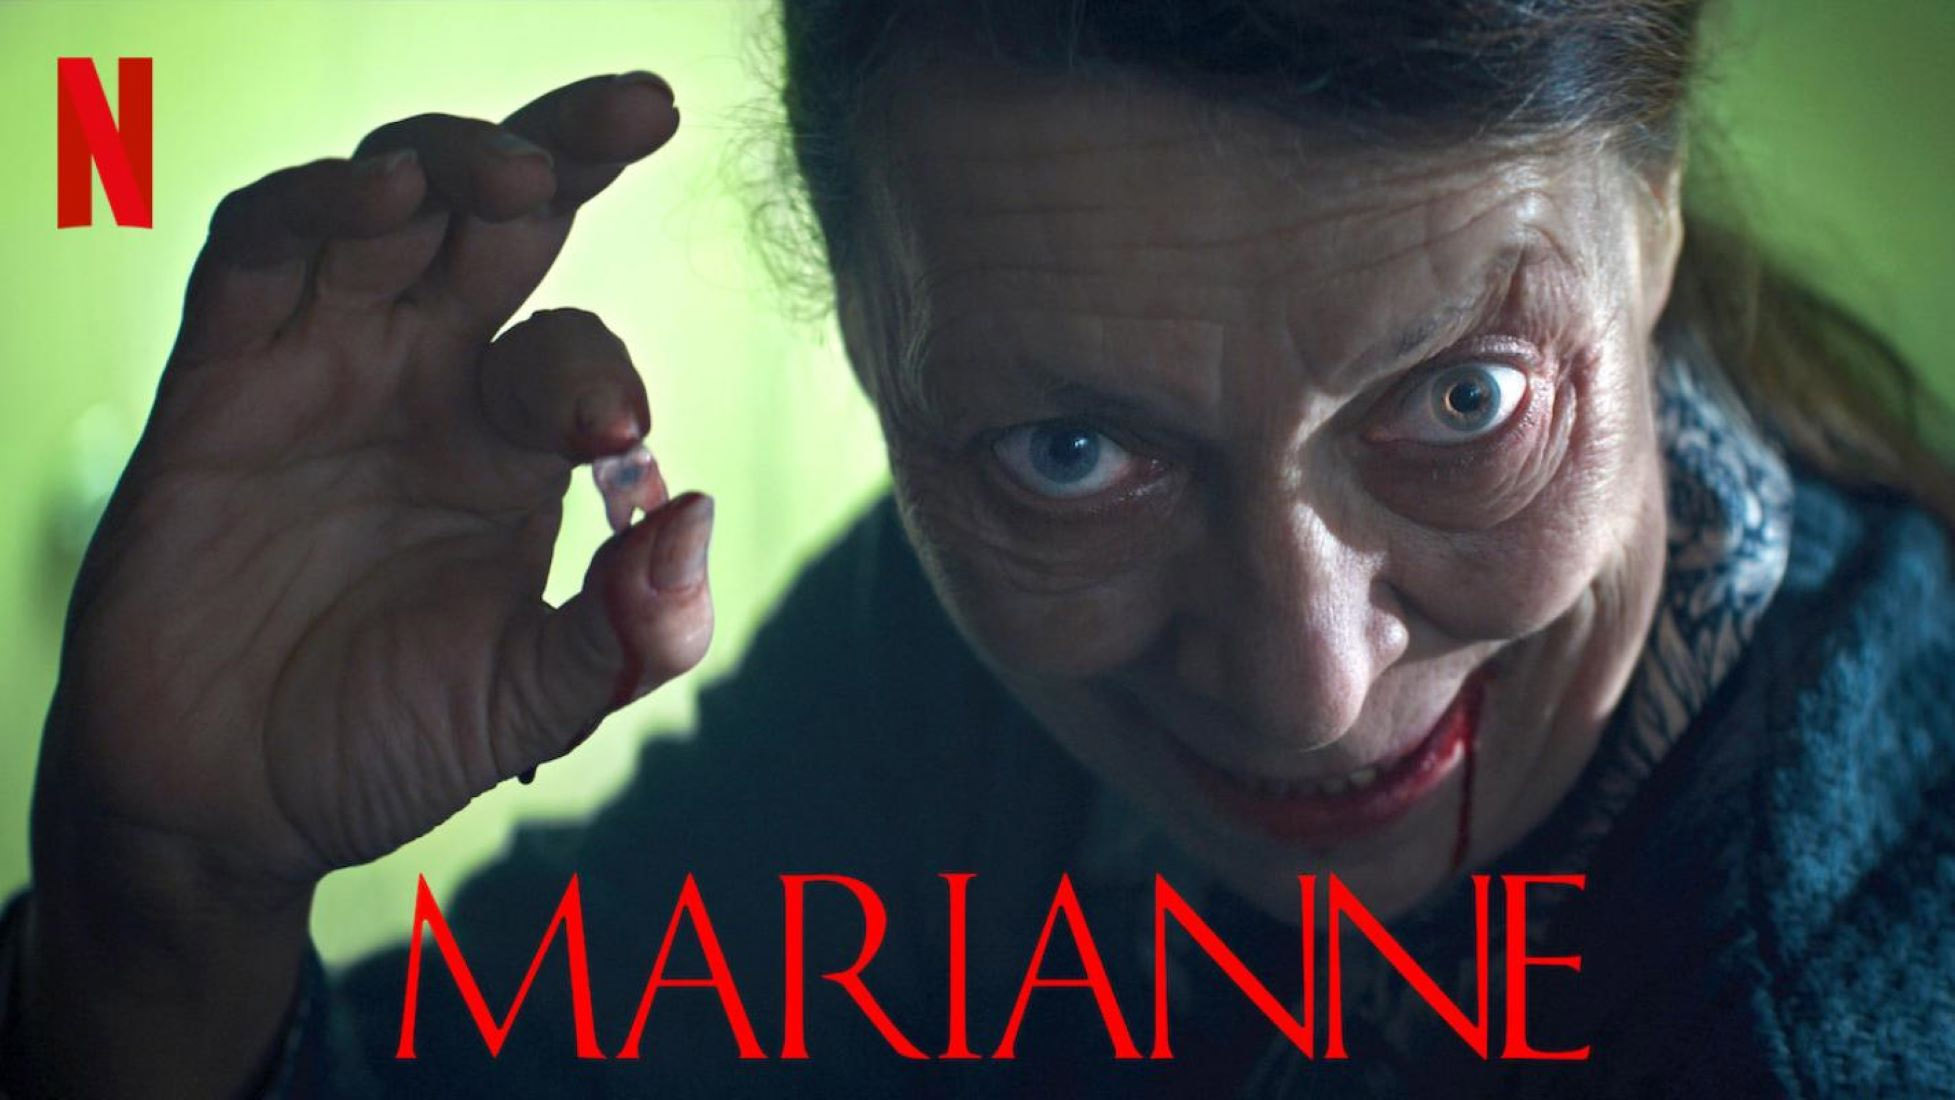 Netflix's Latest Horror Original Series 'Marianne' Is 'Balls To The